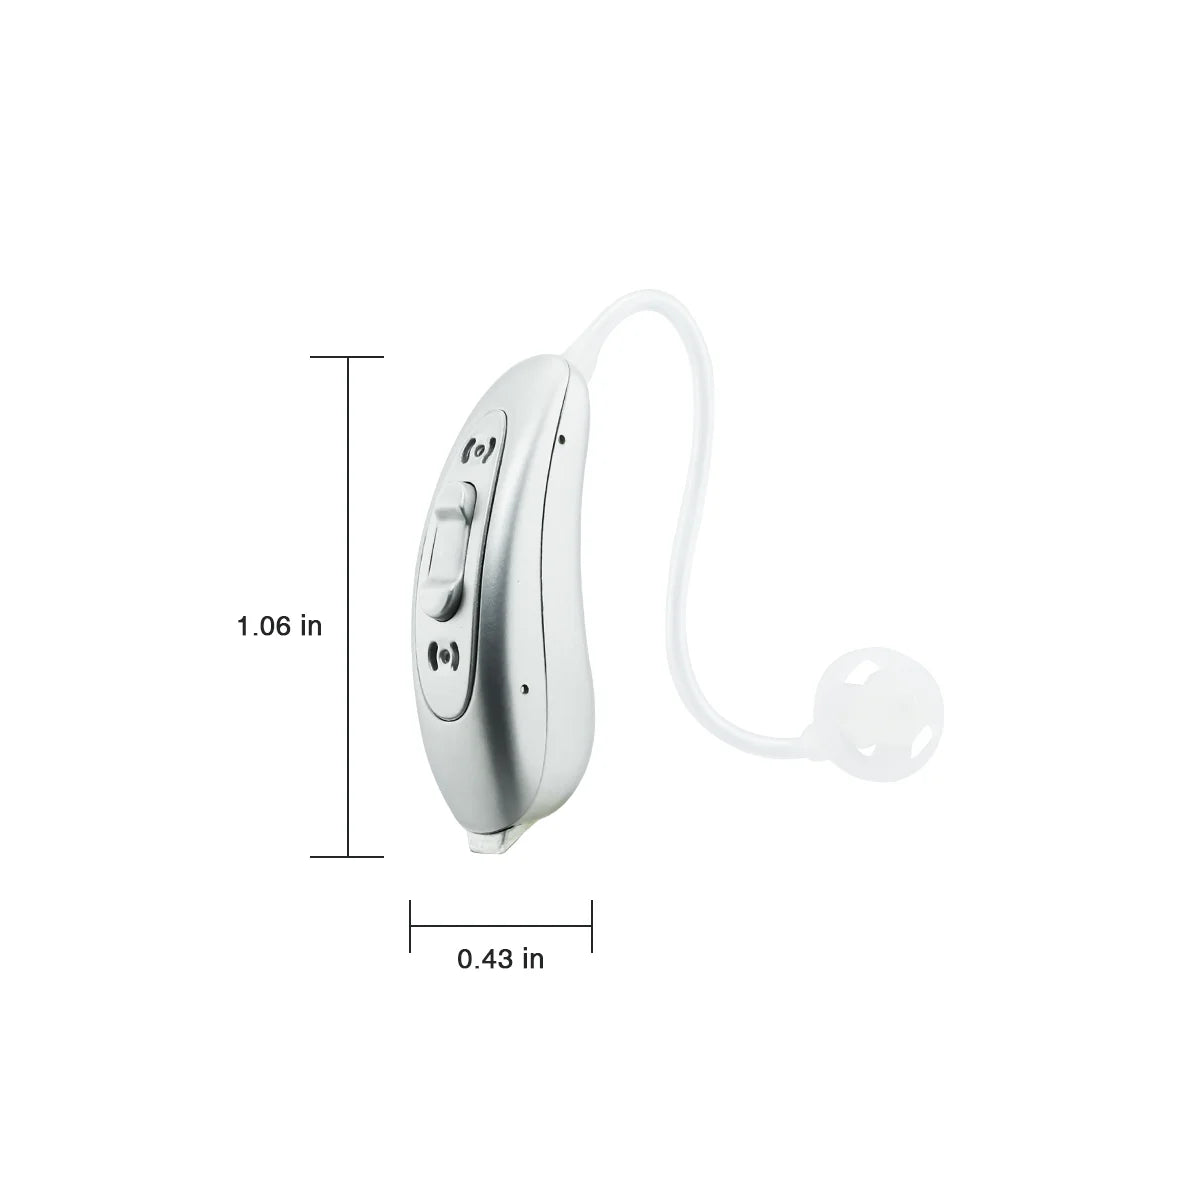 BTE hearing aids for hearing loss